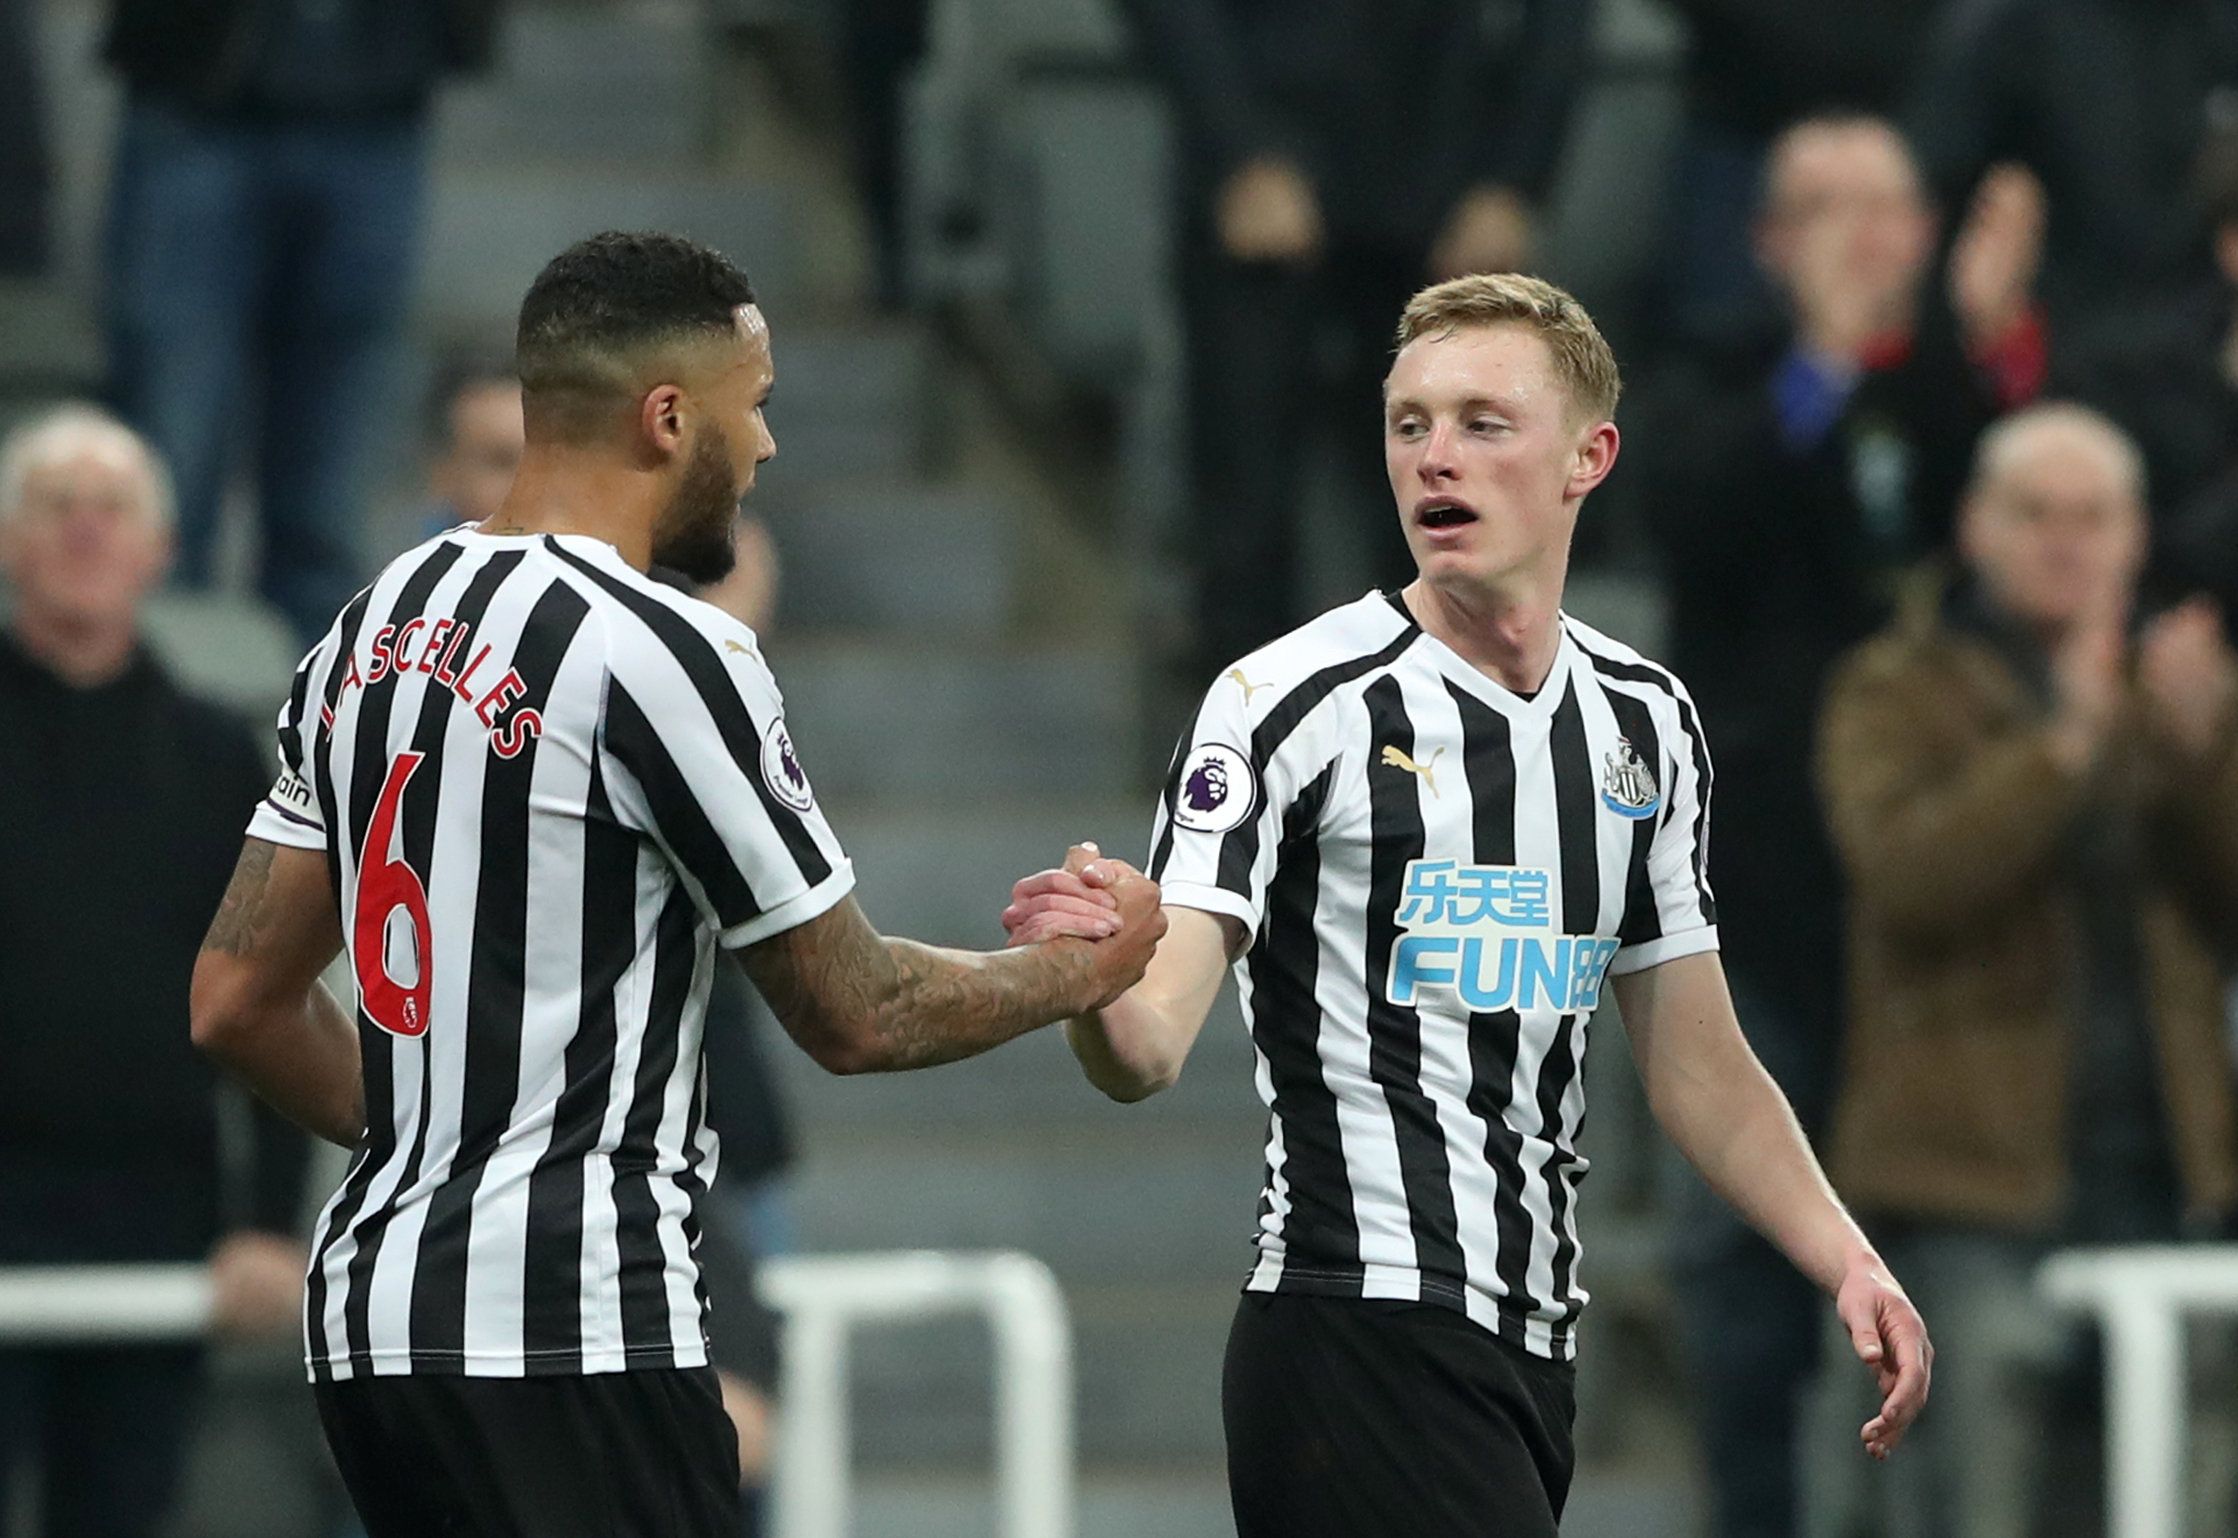 Soccer Football - Premier League - Newcastle United v Burnley - St James' Park, Newcastle, Britain - February 26, 2019  Newcastle United's Sean Longstaff celebrates scoring their second goal with Jamaal Lascelles          REUTERS/Scott Heppell  EDITORIAL USE ONLY. No use with unauthorized audio, video, data, fixture lists, club/league logos or "live" services. Online in-match use limited to 75 images, no video emulation. No use in betting, games or single club/league/player publications.  Please